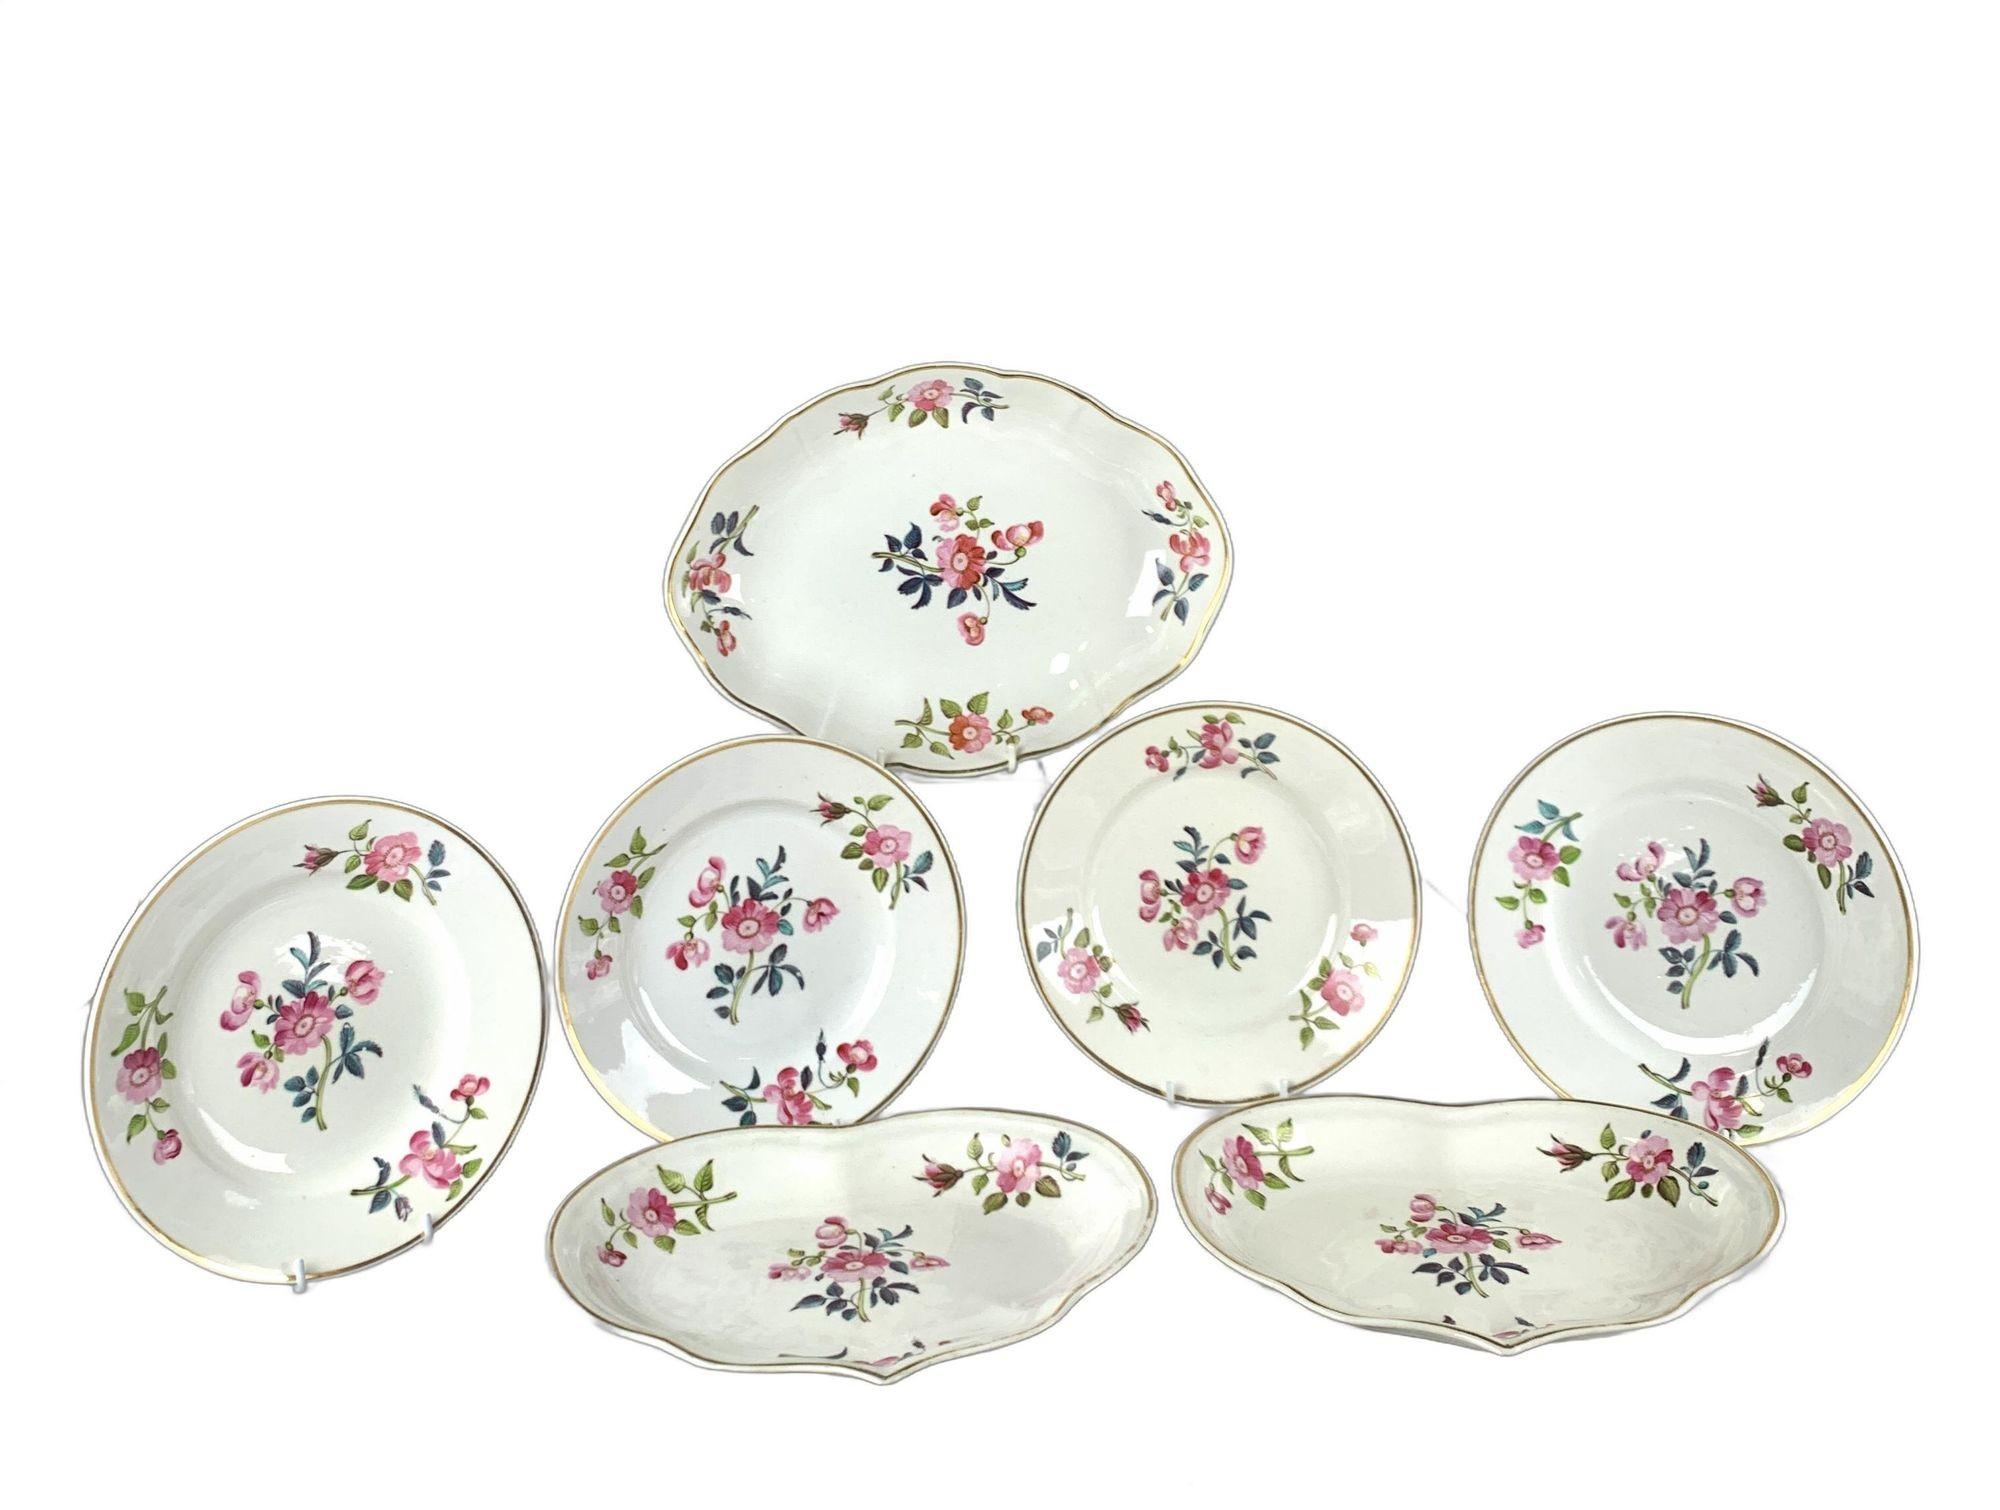 These lovely dishes were made in England around 1815.
They have hand-painted pink roses on bright white Derby porcelain, complemented by green and turquoise leaves.
During the late 18th and early 19th century, flower painting was a popular style for